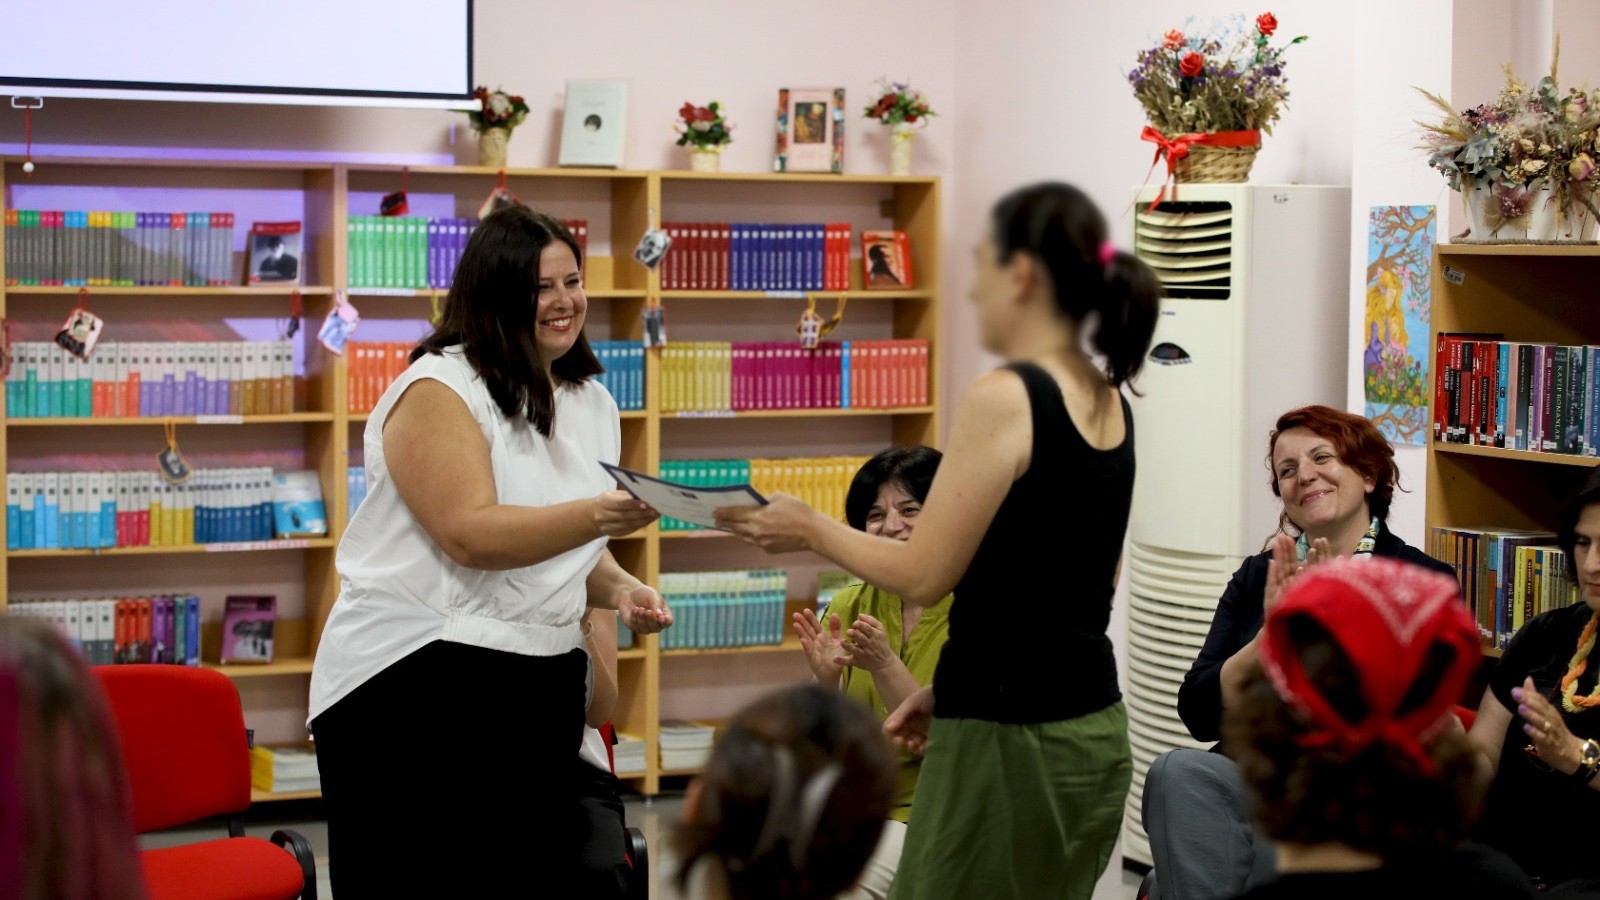 Positive Parenting programme completes the pilot phase supported by the Pompidou Group